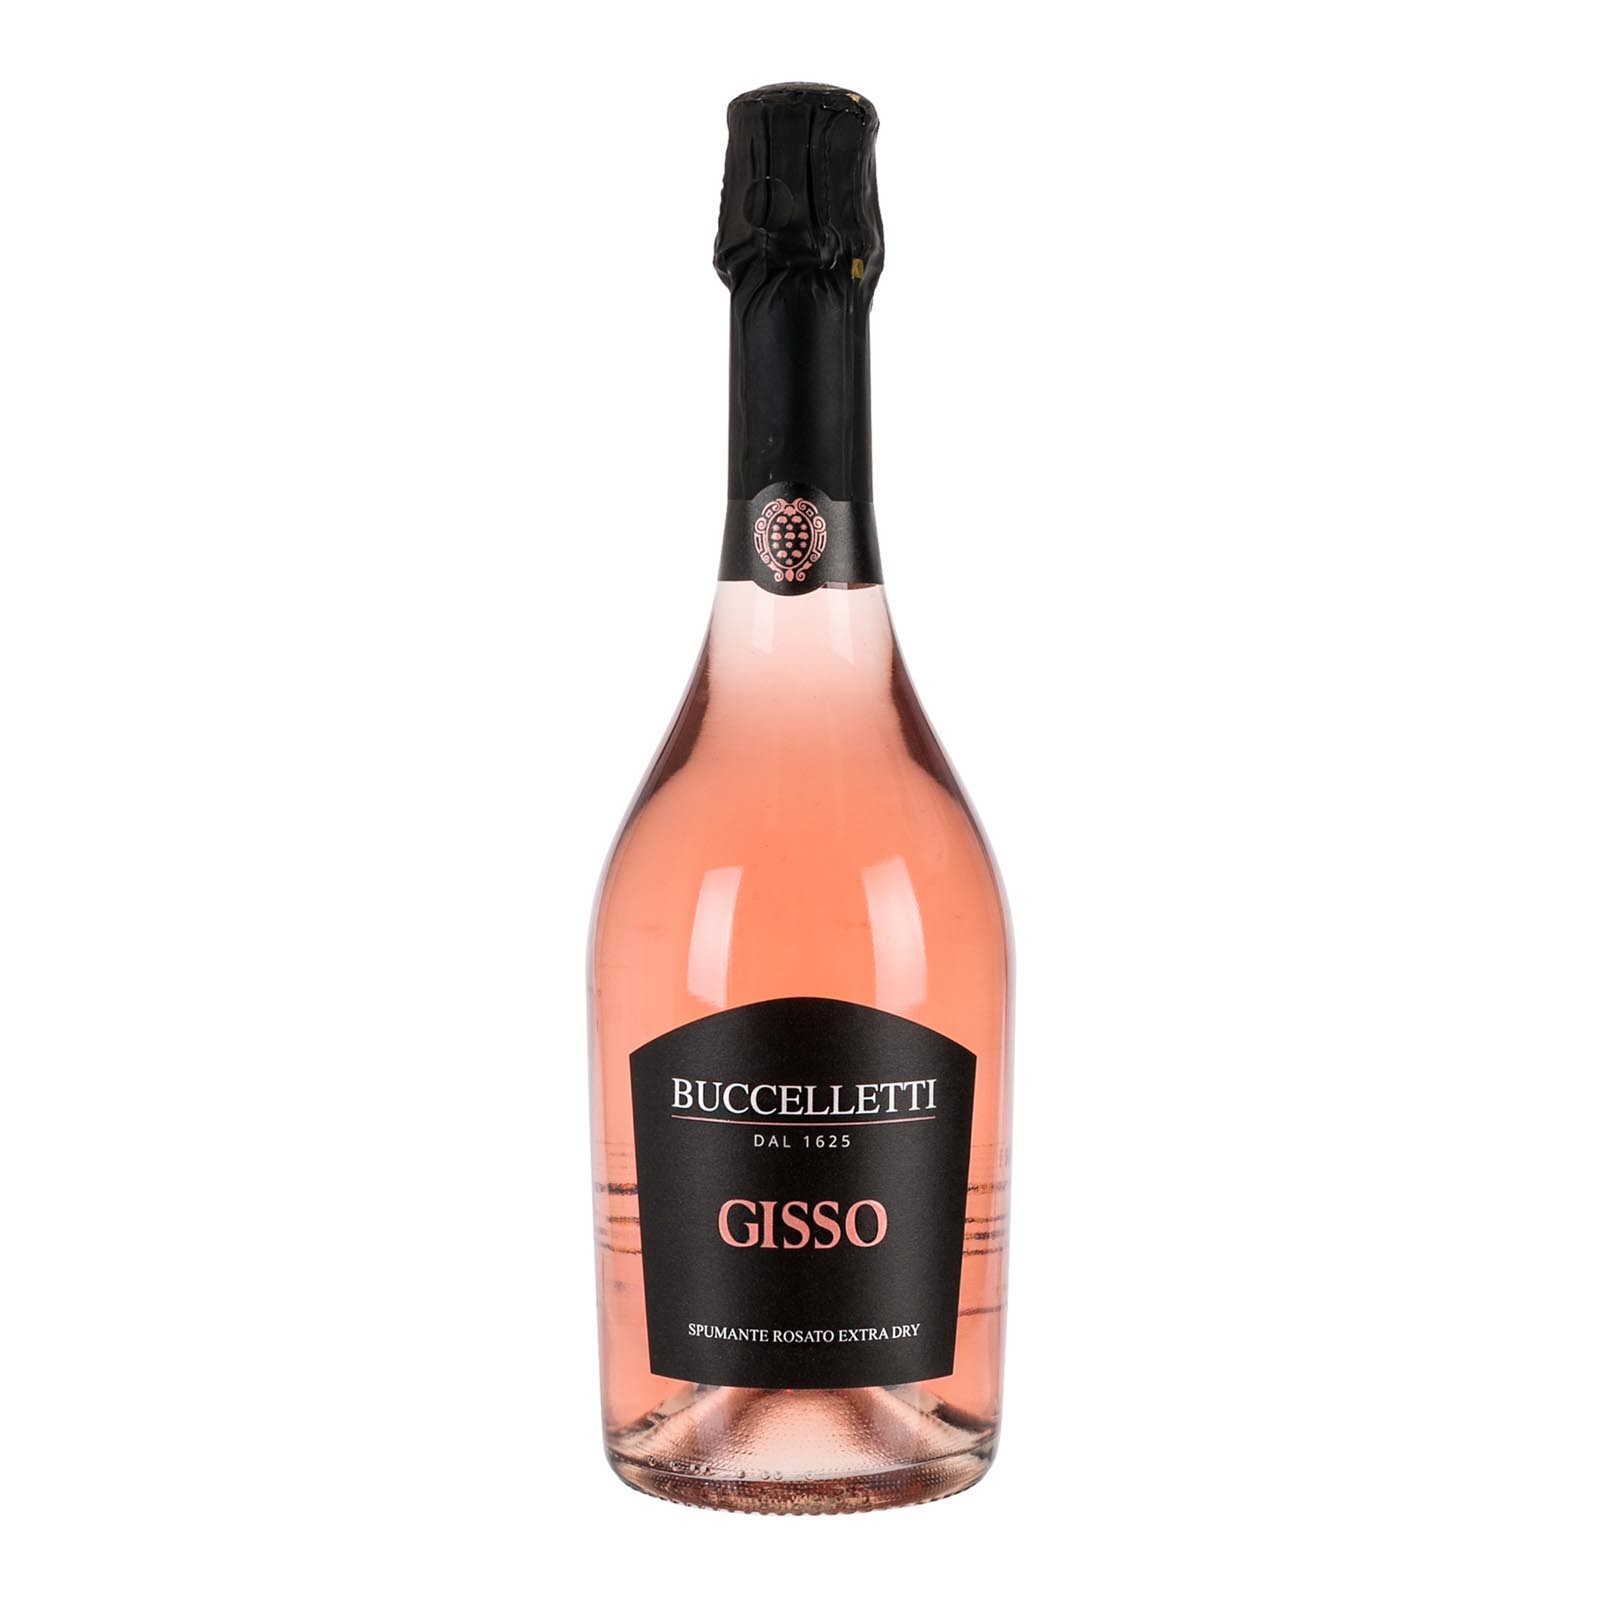 “Gisso” of Buccelletti is a sparkling wine with a pink color and fine and persistent perlage.